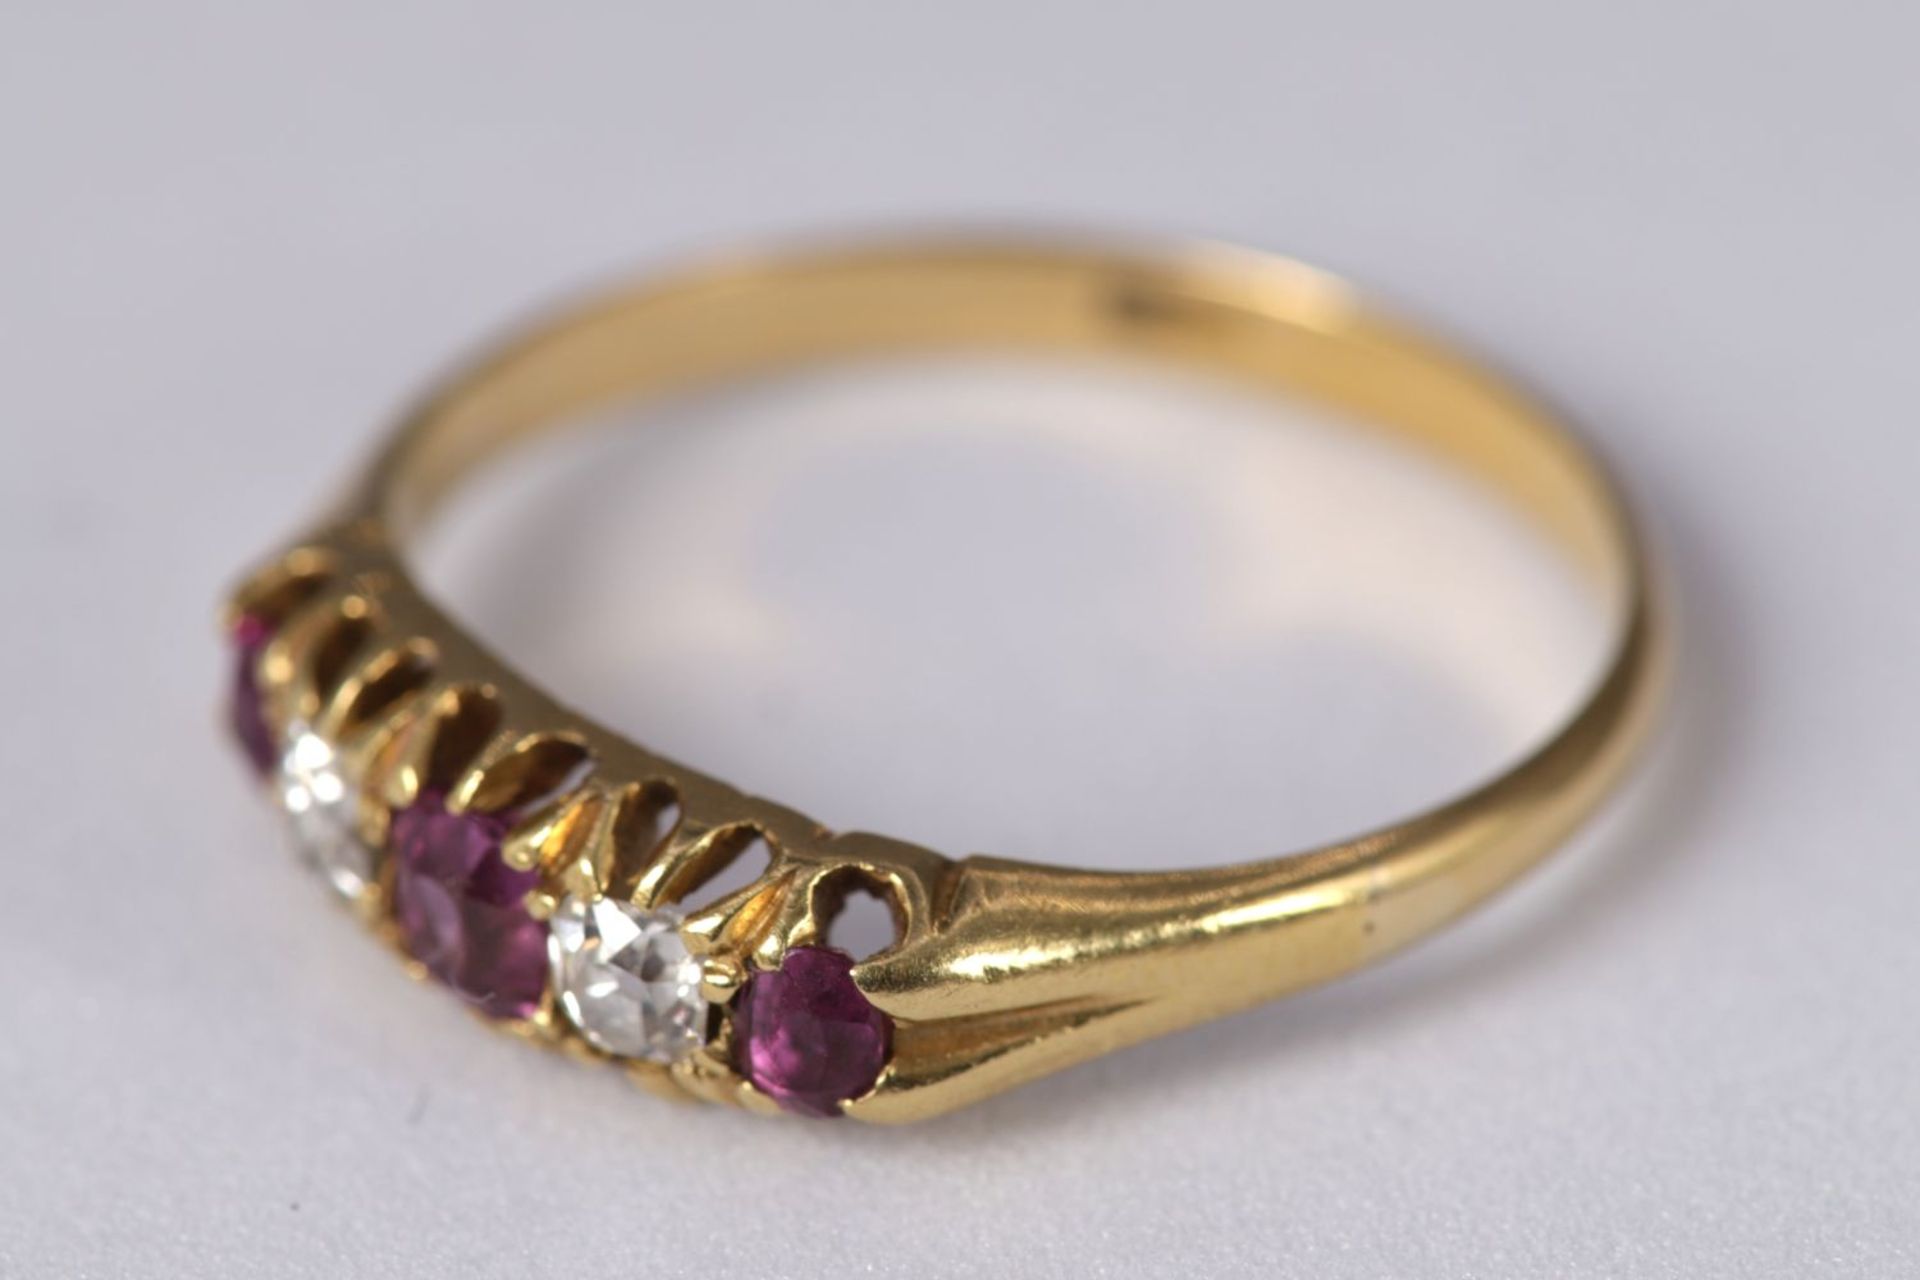 ANTIQUE 18K YELLOW GOLD, RUBY & DIAMOND RING - Image 3 of 4